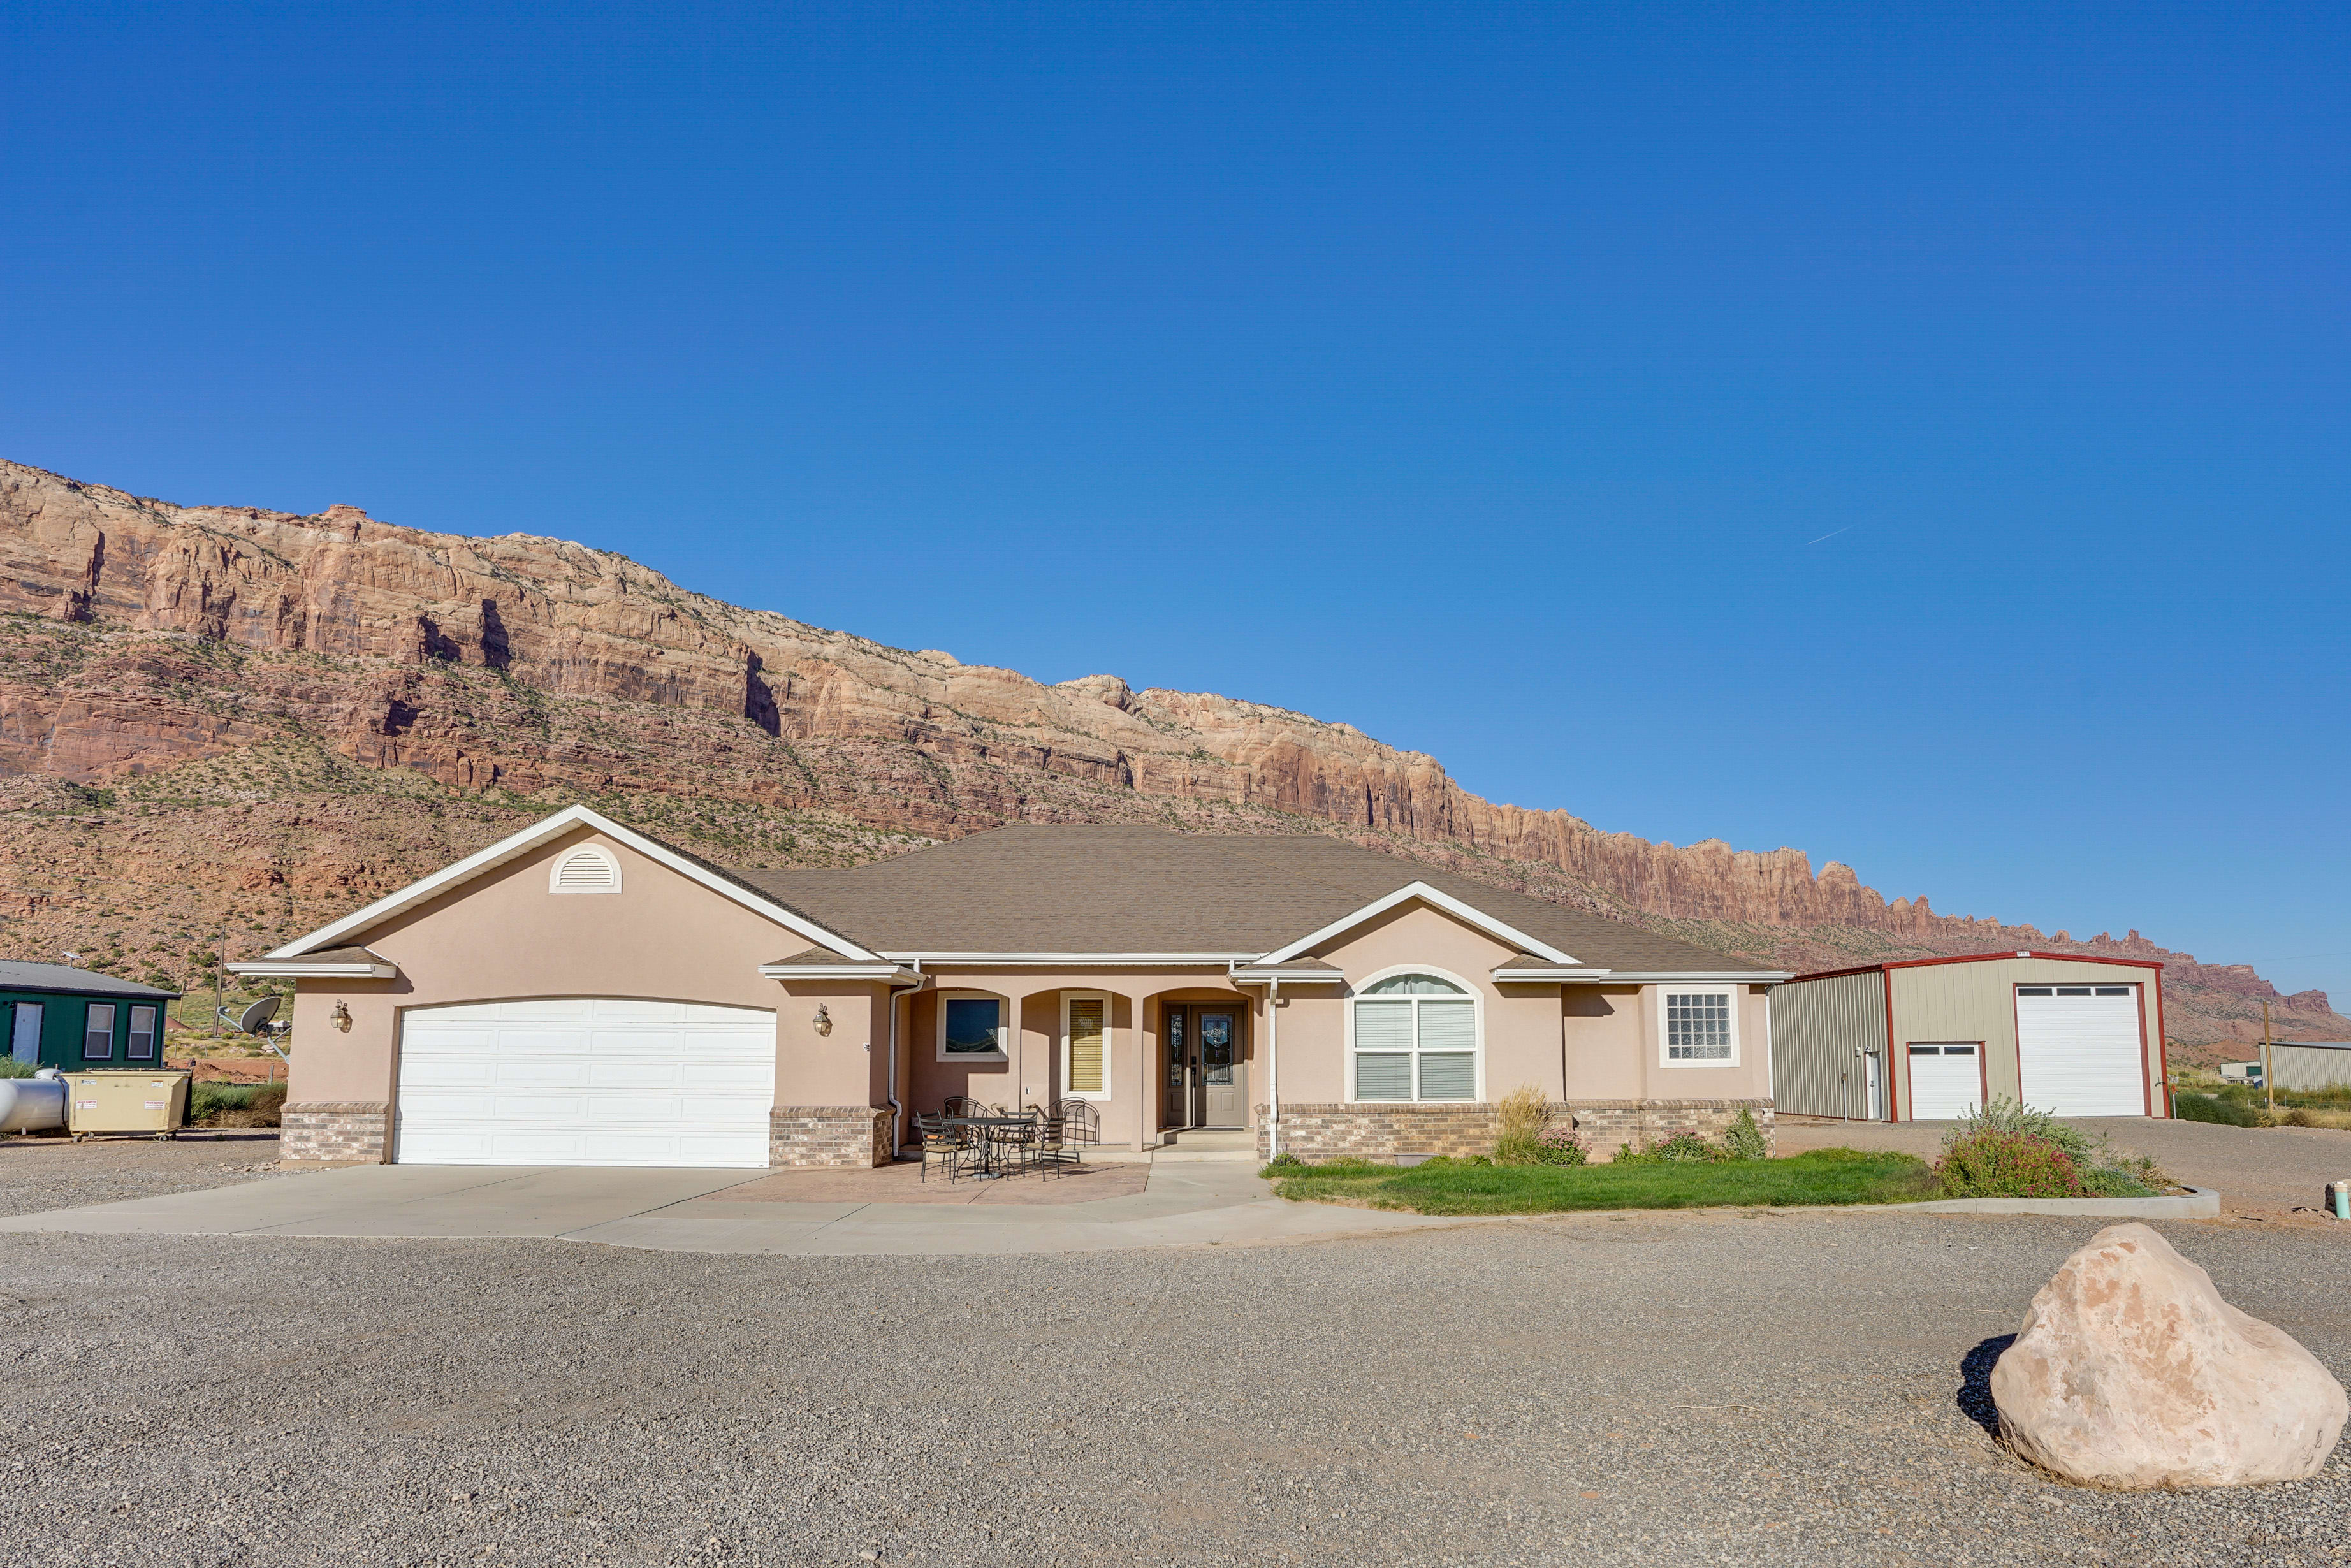 Moab Vacation Rental | 5BR | 5.5BA | 2 Steps Required | 3,200 Sq Ft